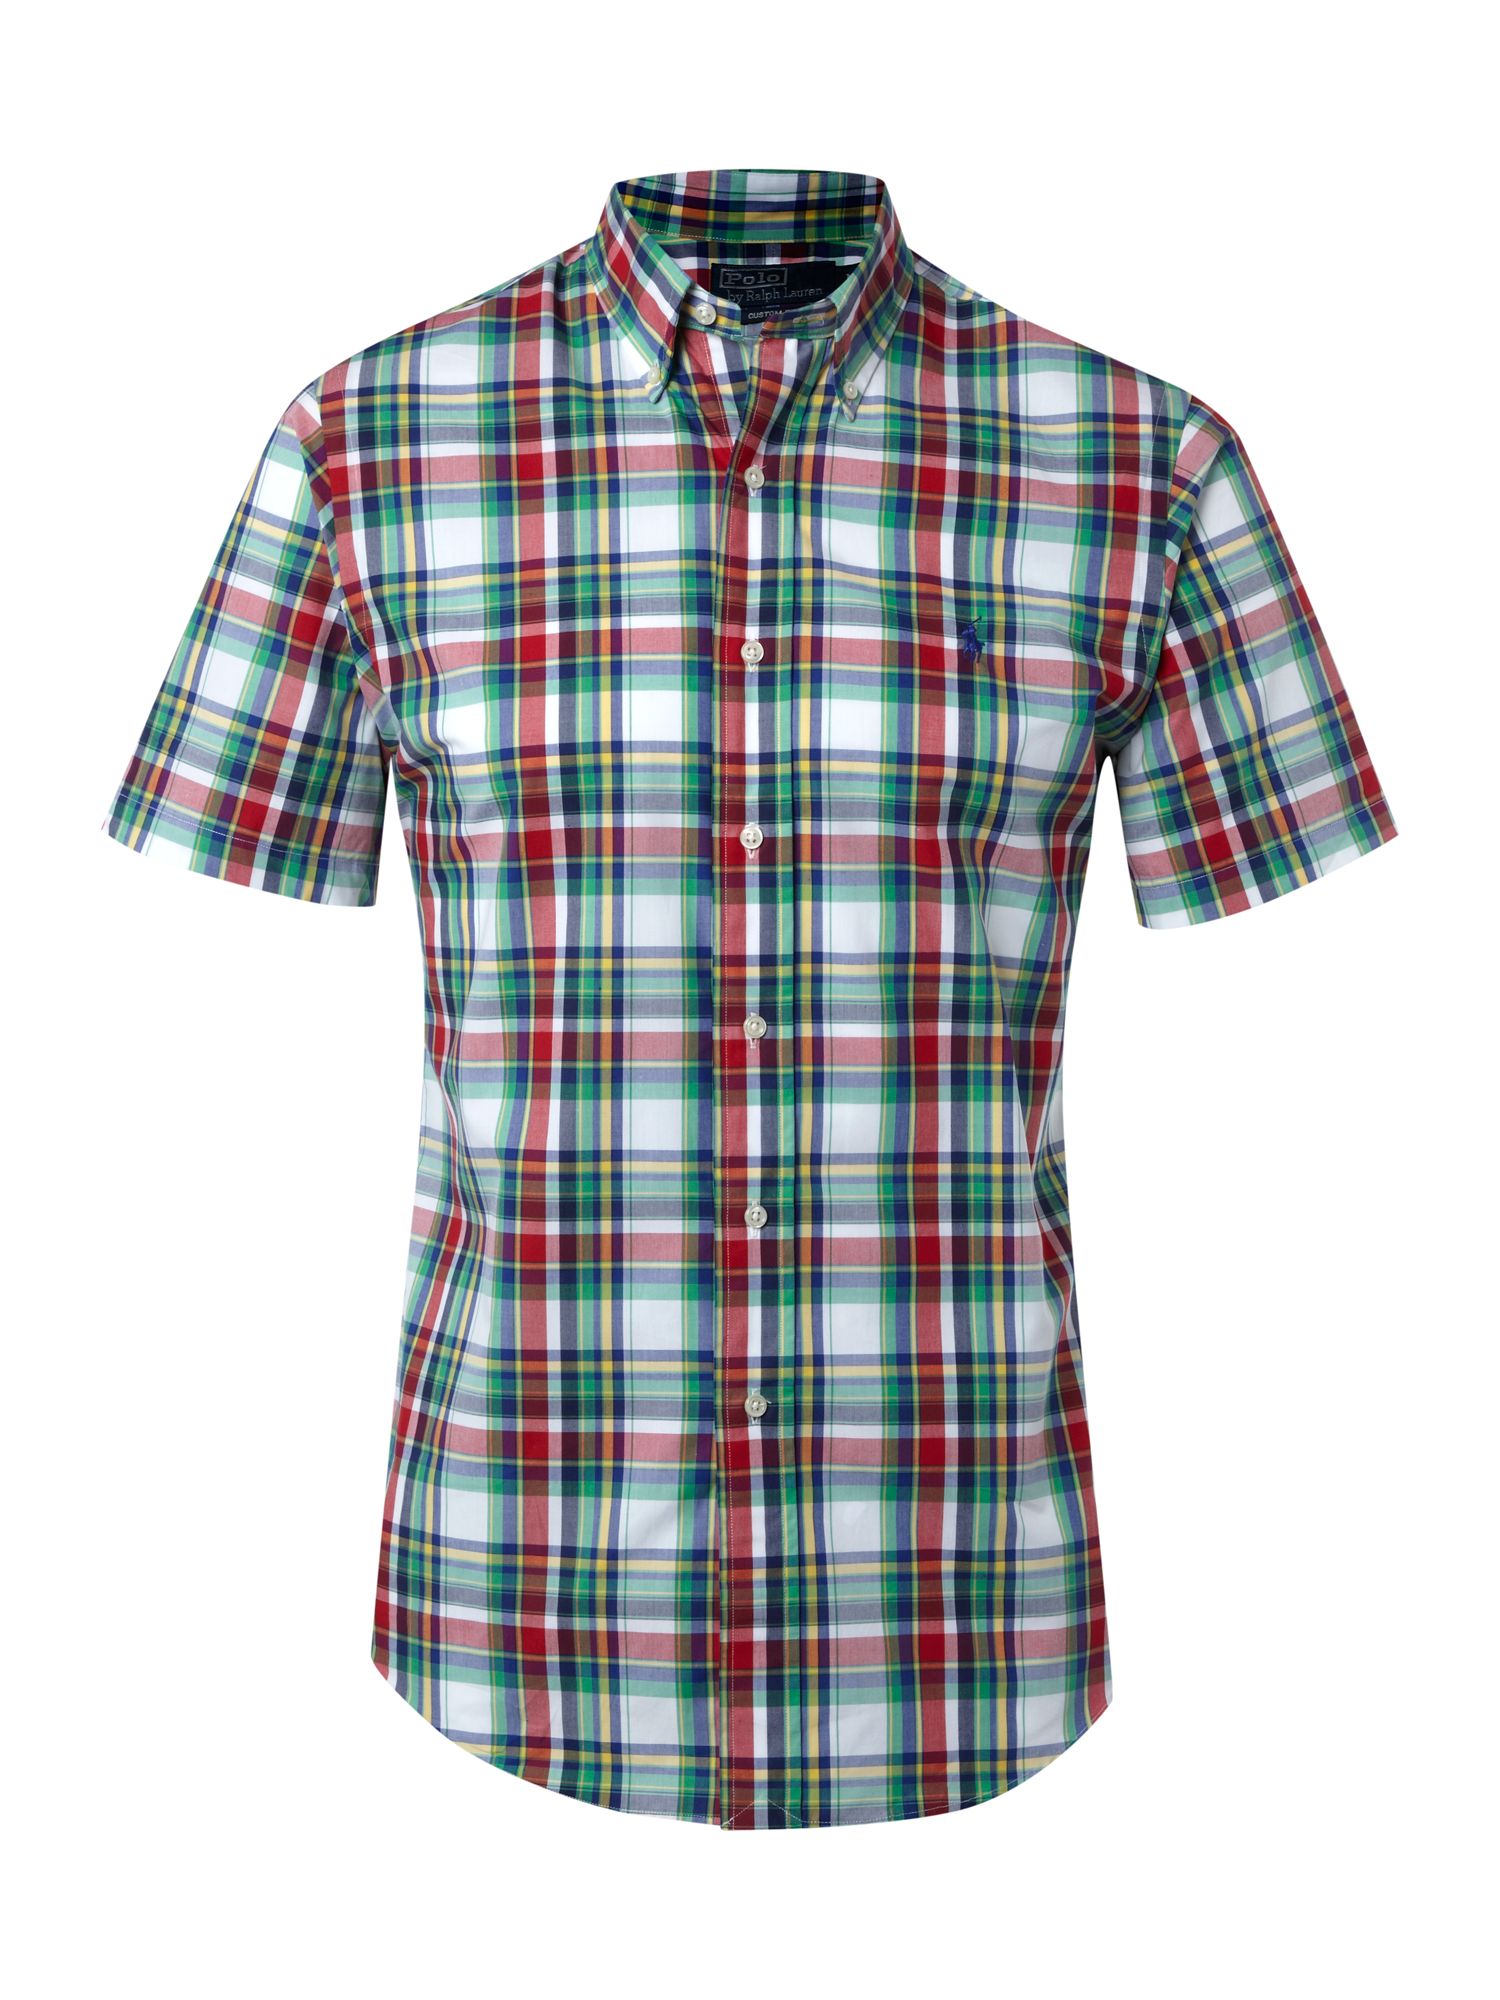 Polo Ralph Lauren Short Sleeved Custom Fitted Bright Plaid Shirt in ...